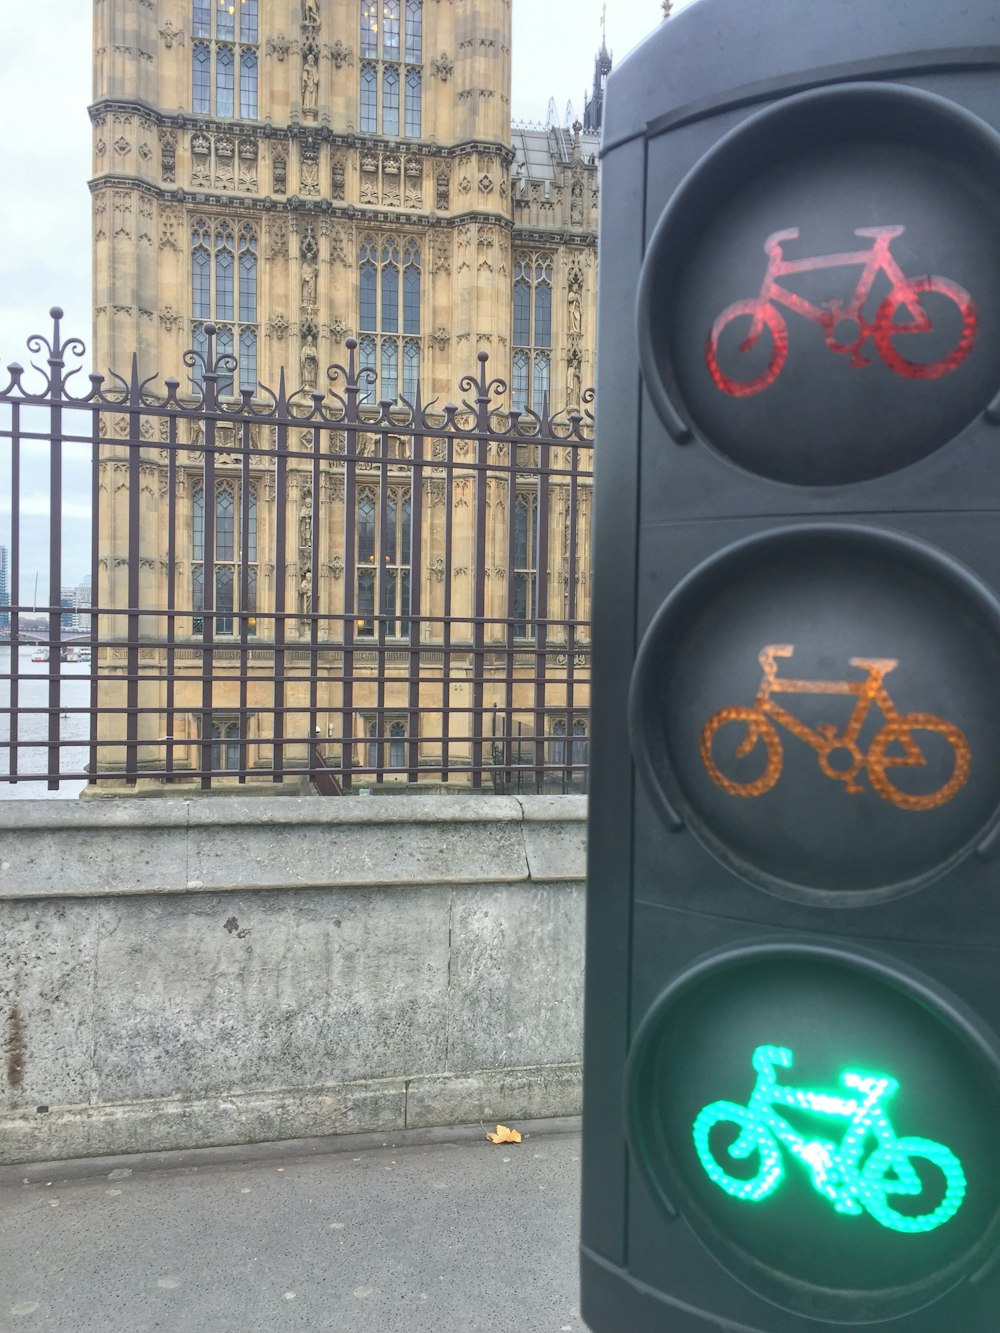 a traffic light has a bicycle symbol on it